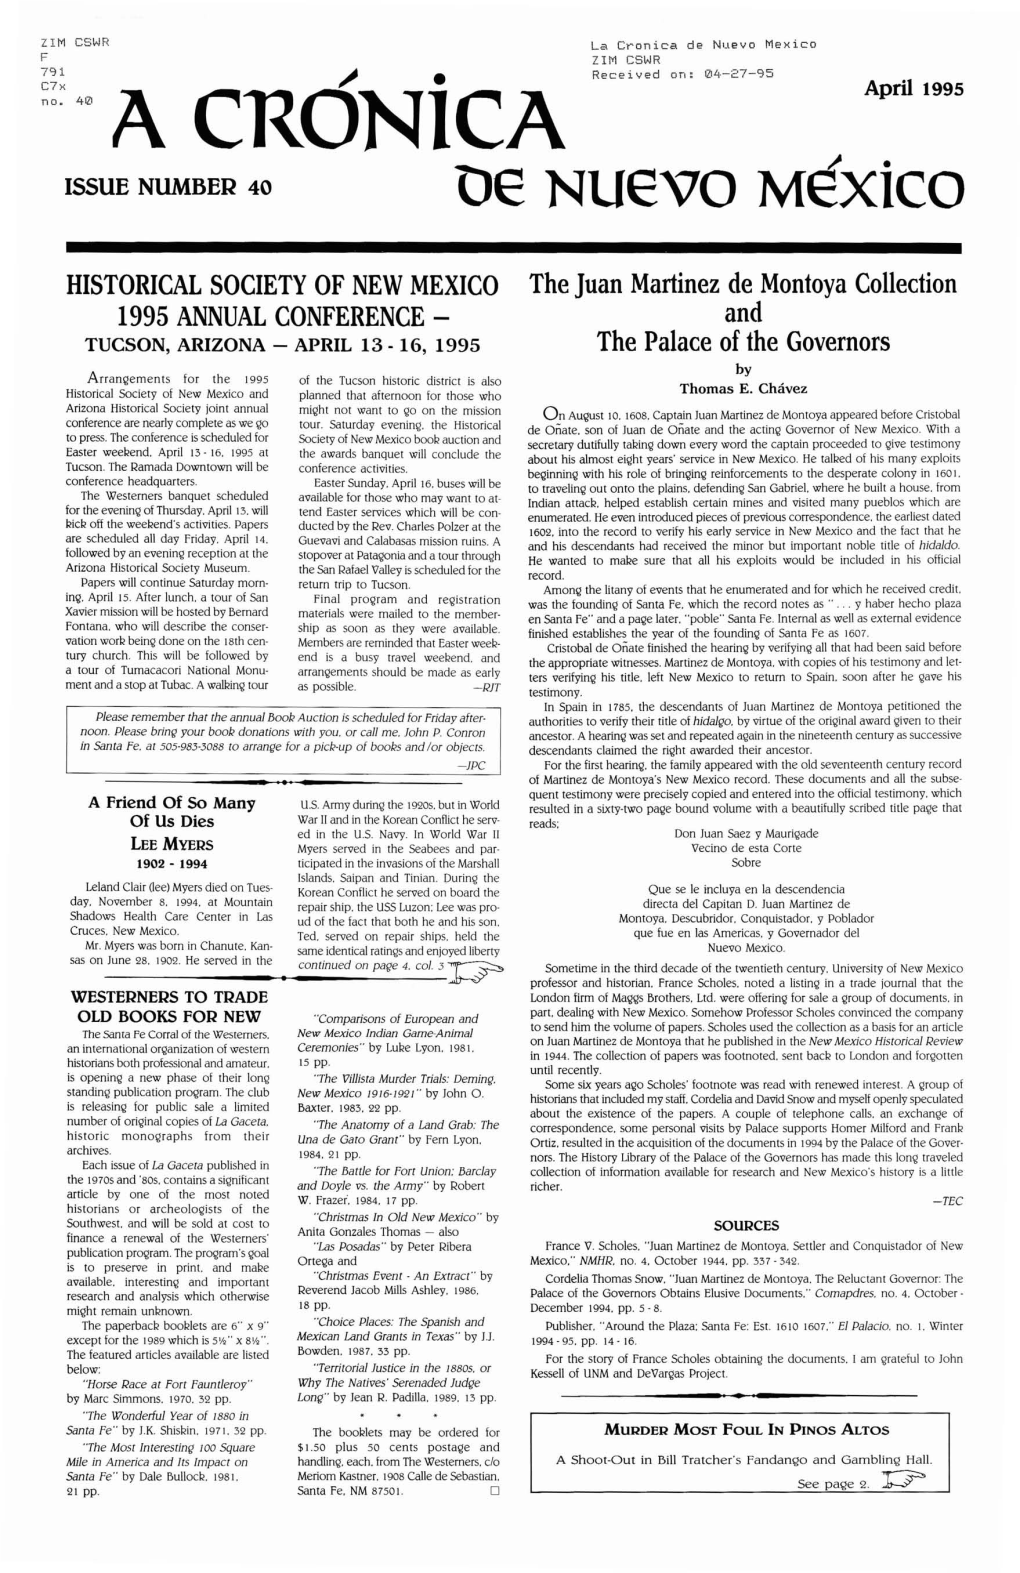 Issue No. 40: April 1995